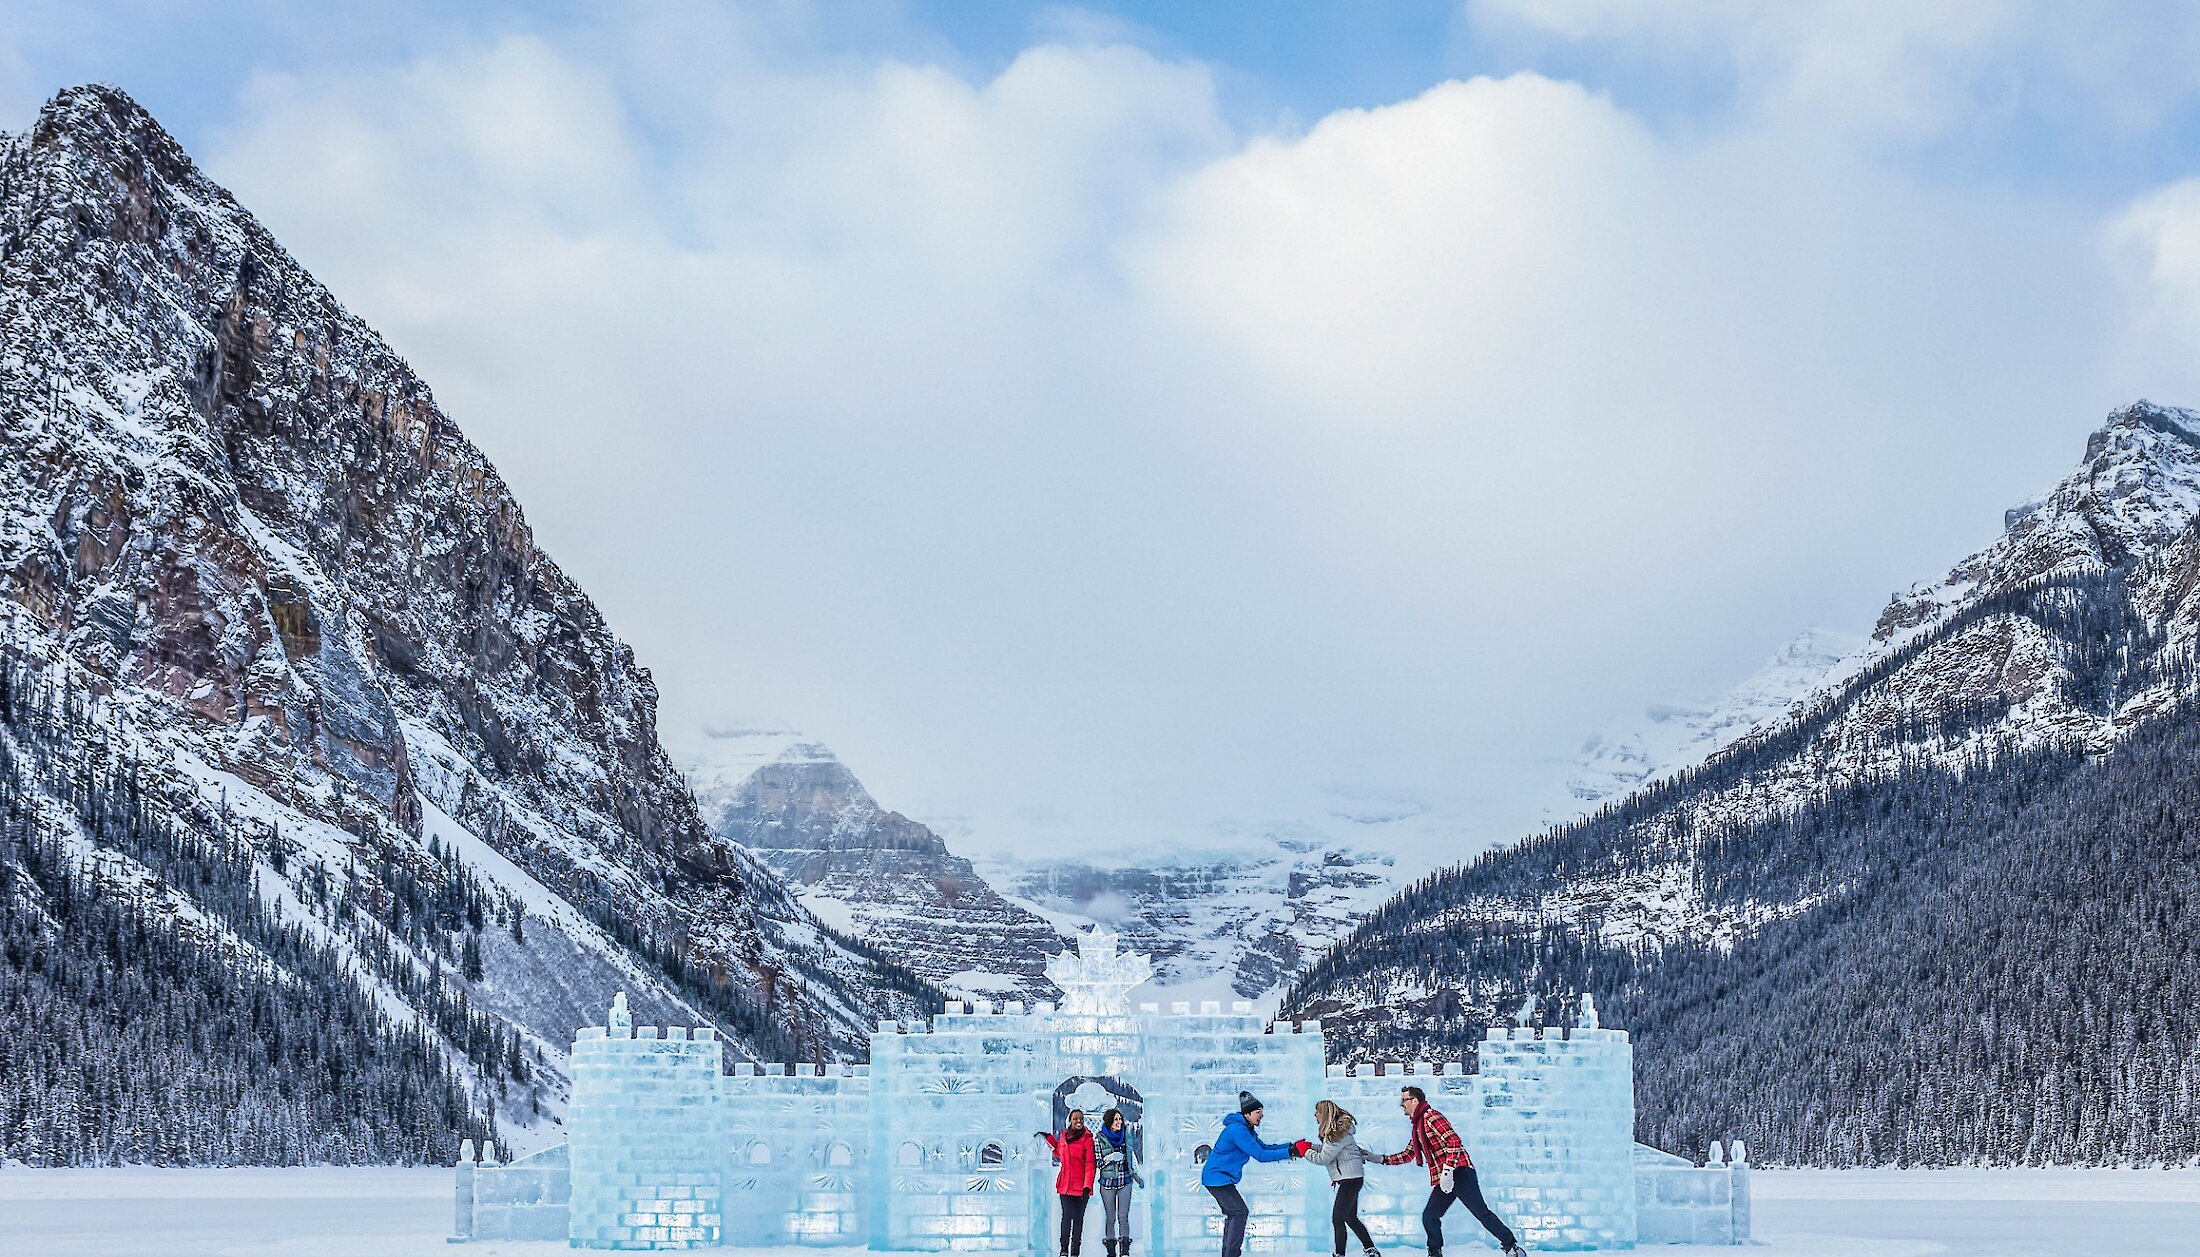 Skating around the Ice Castle in the middle of frozen Lake Louise